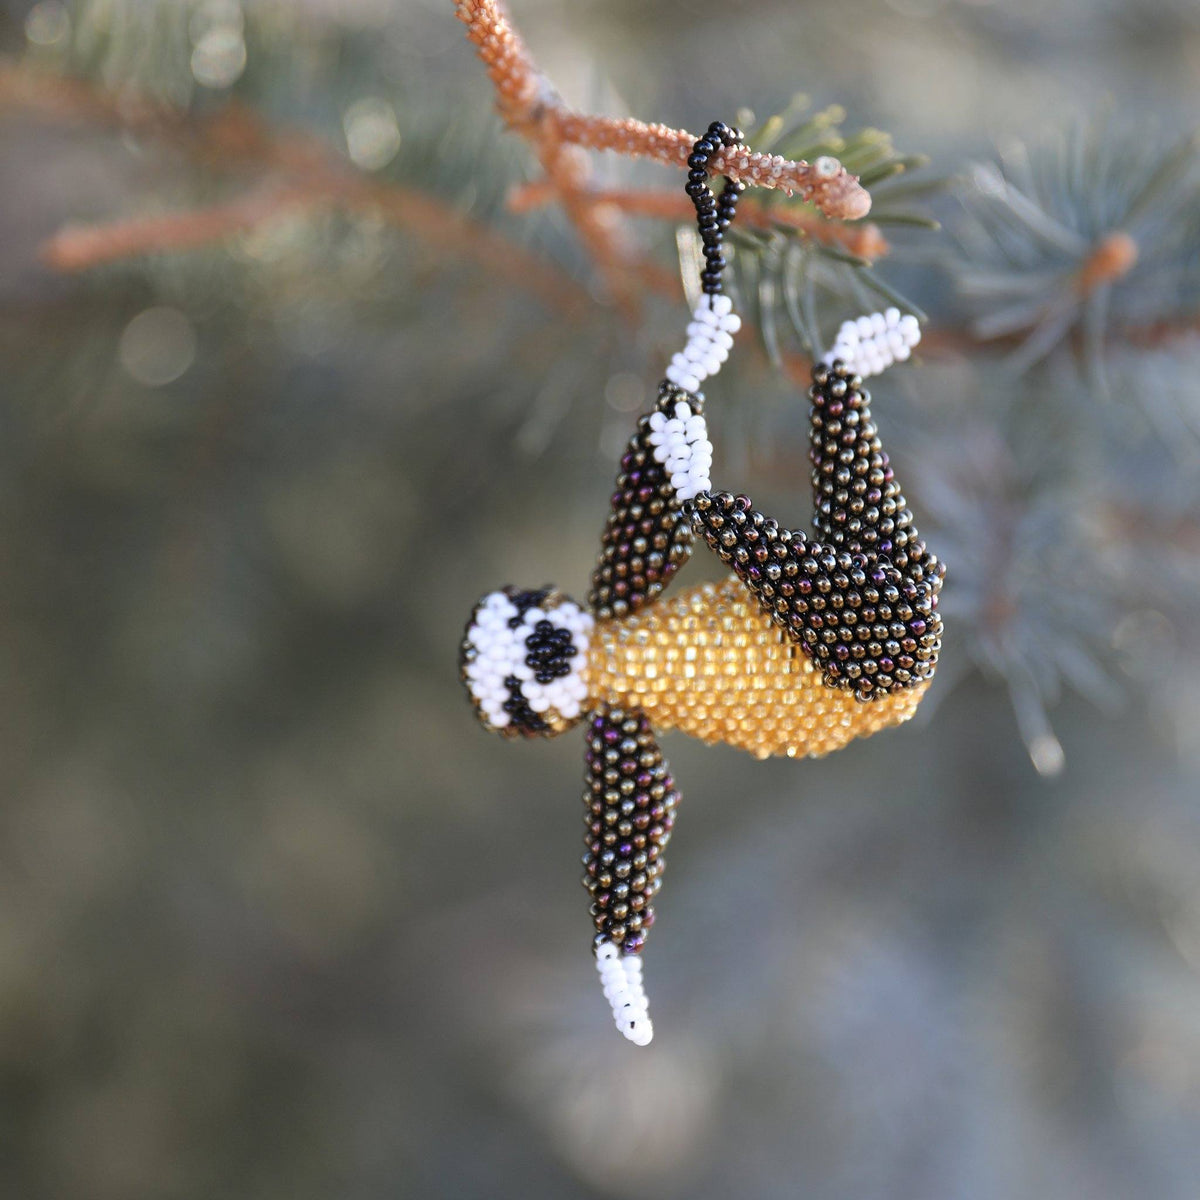 Glass Bead Ornament, Sloth Ornament Melange Collection 